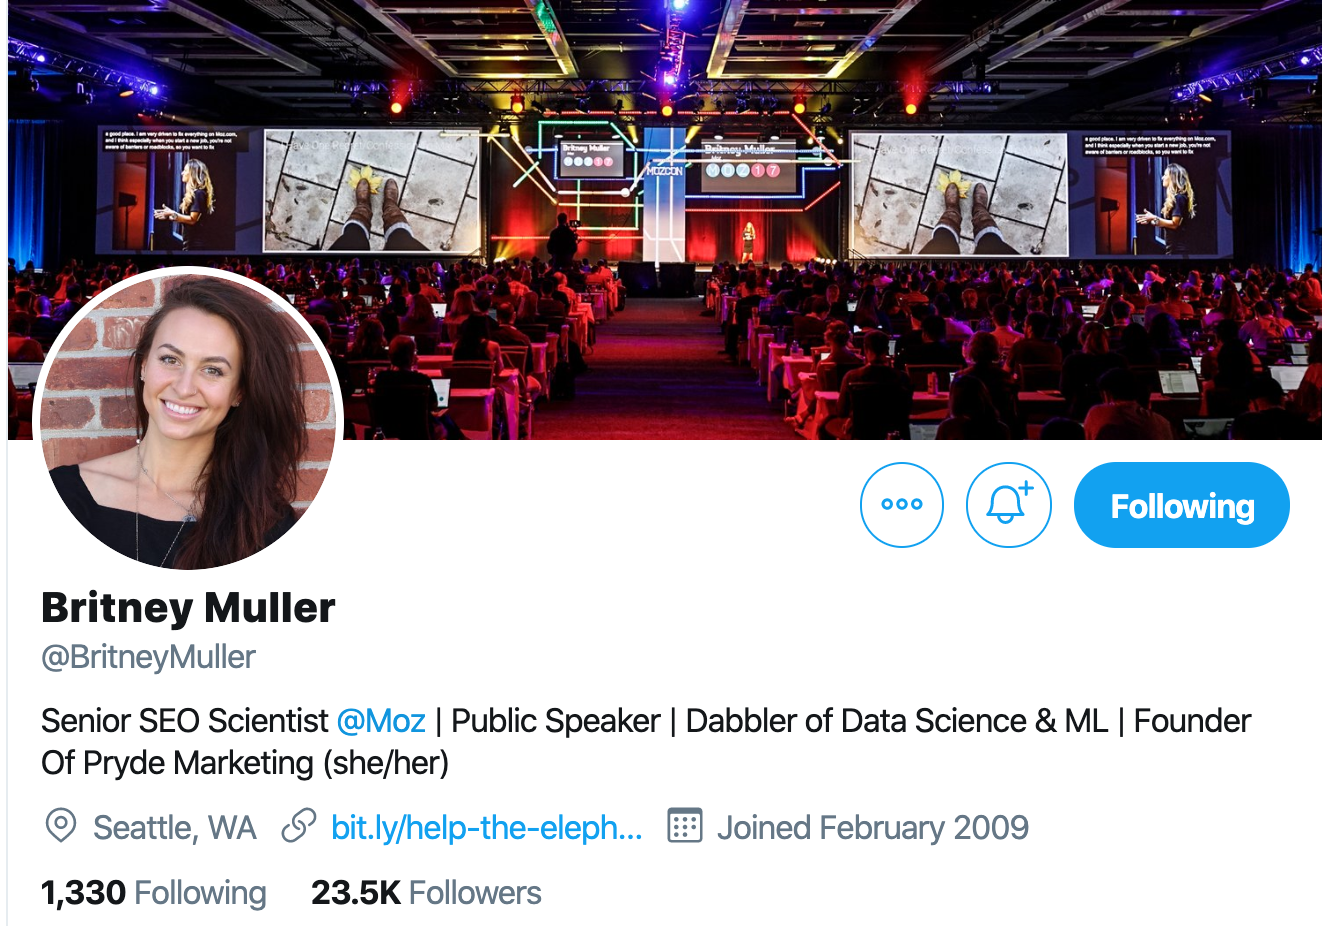 Britney Muller. SEO scientist to follow on twitter